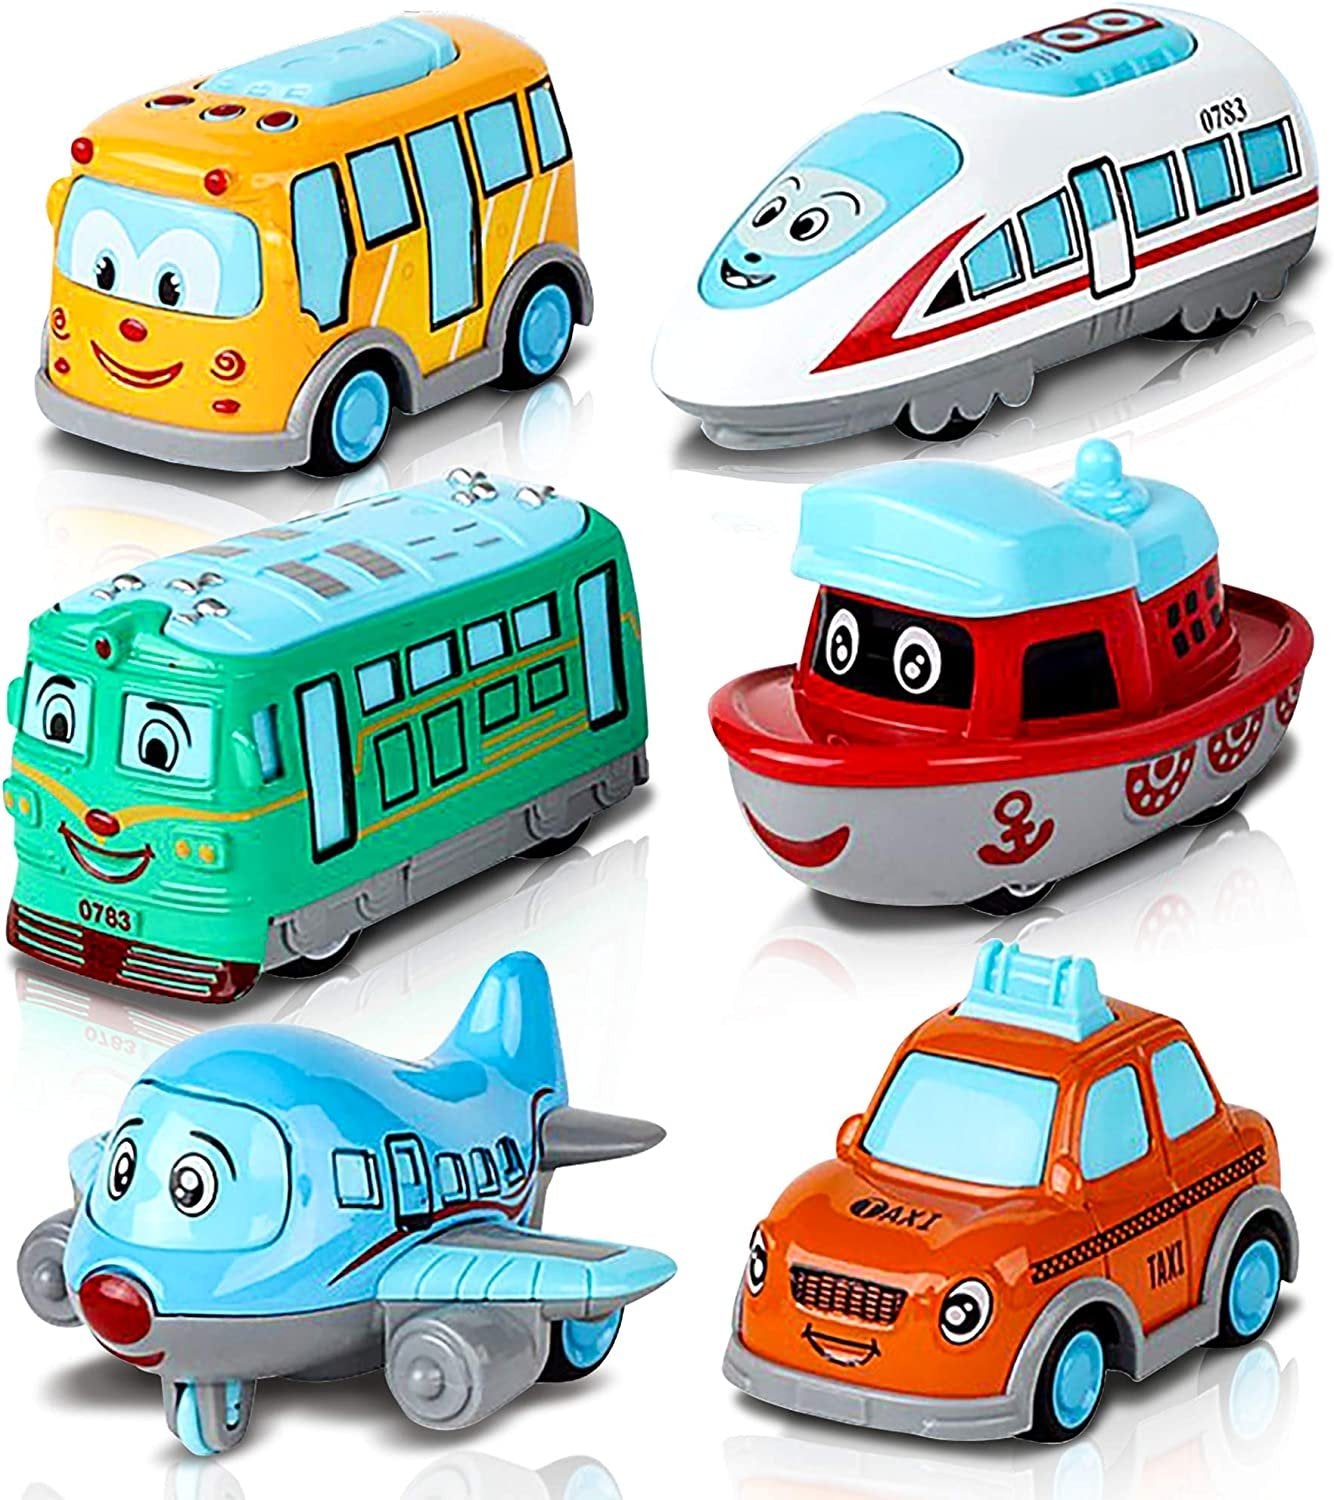 Metal Cartoon Car Set - Set of 6 Mini Pullback Toy Cars - Pullback Train, Bus, Taxi, Tram, Plane and Ship - Party Favors, Best Birthday Gift for Boys, Girls, Toddlers